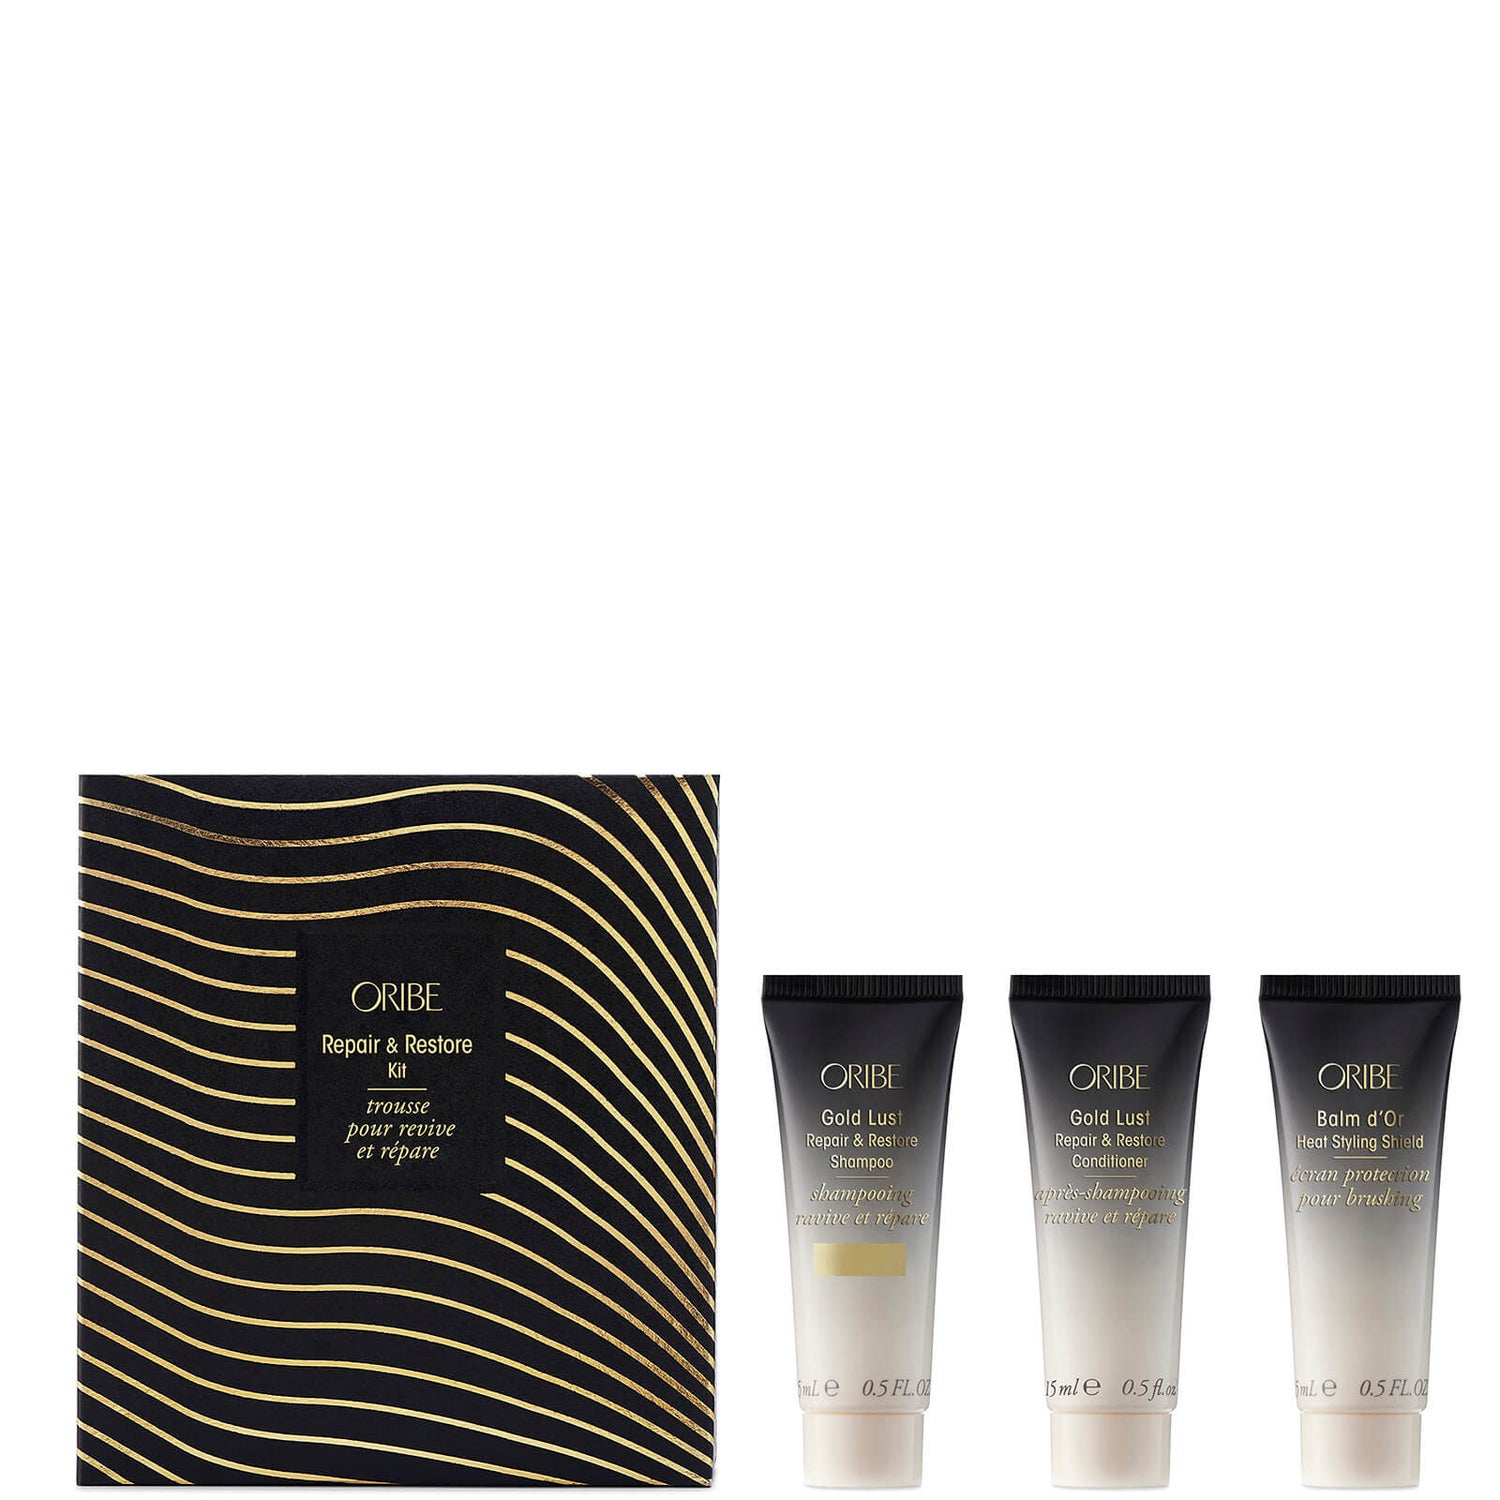 Oribe Gold Lust Repair and Restore Shampoo Deluxe 15ml (Worth $10.00)